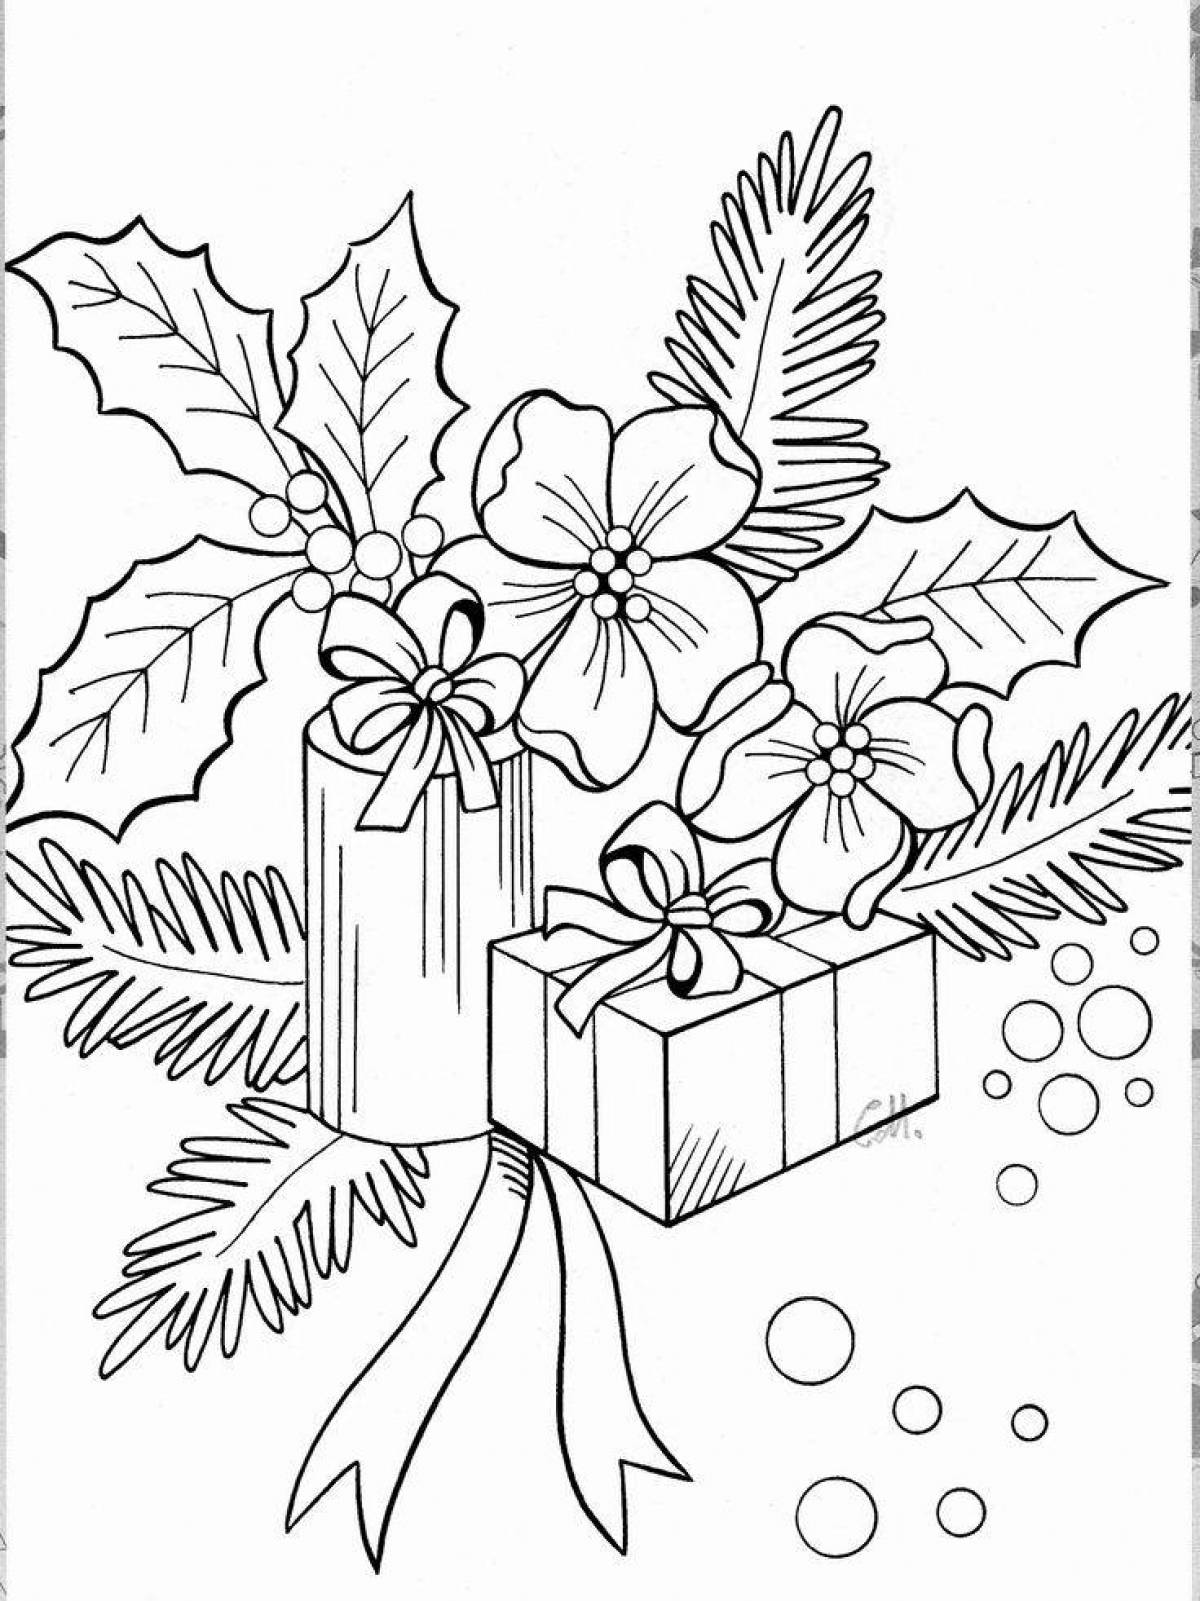 Awesome Christmas card coloring book